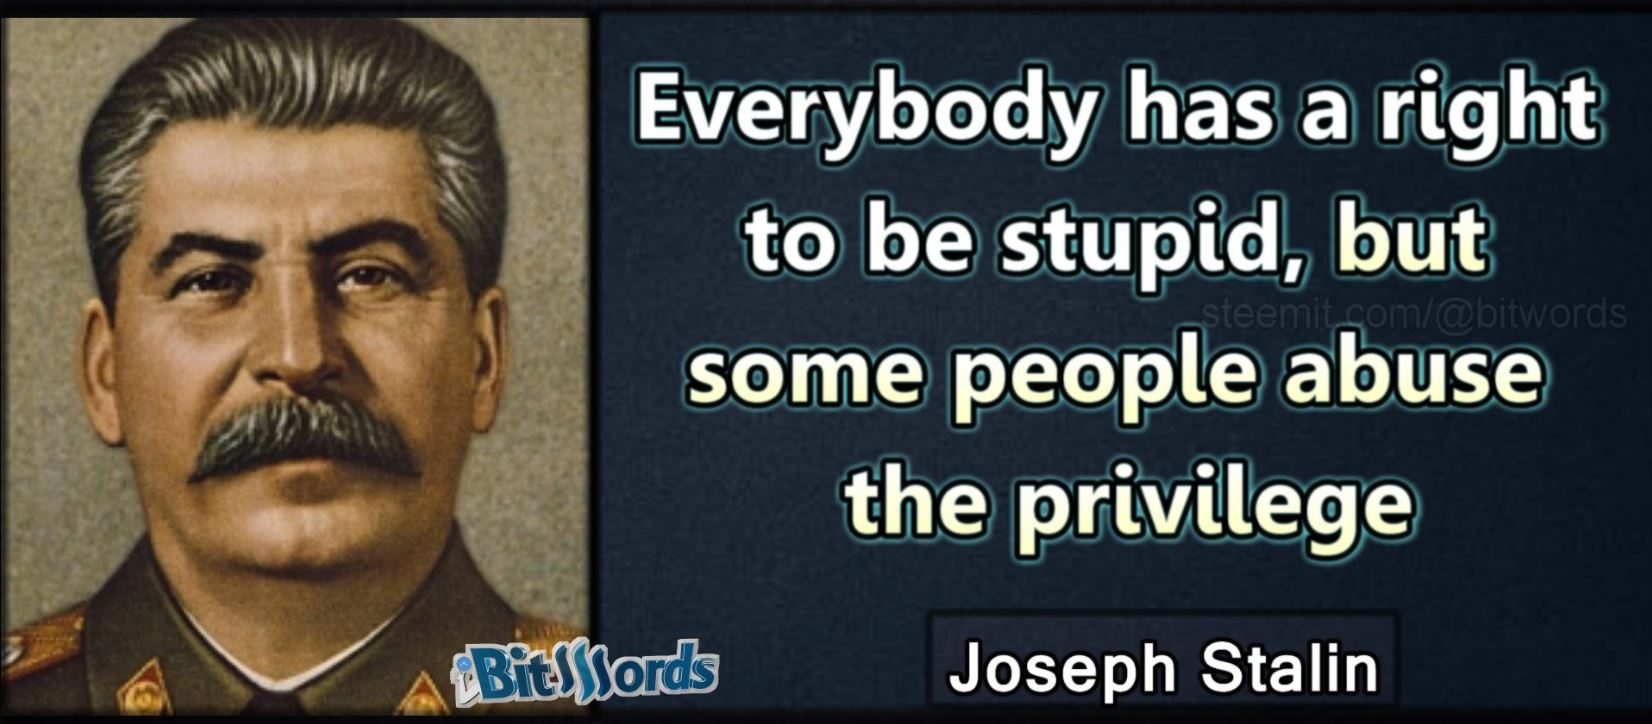 bitwords steemit quote of the day Everybody has a right to be stupid but some people abuse the privilege Joseph Stalin.JPG